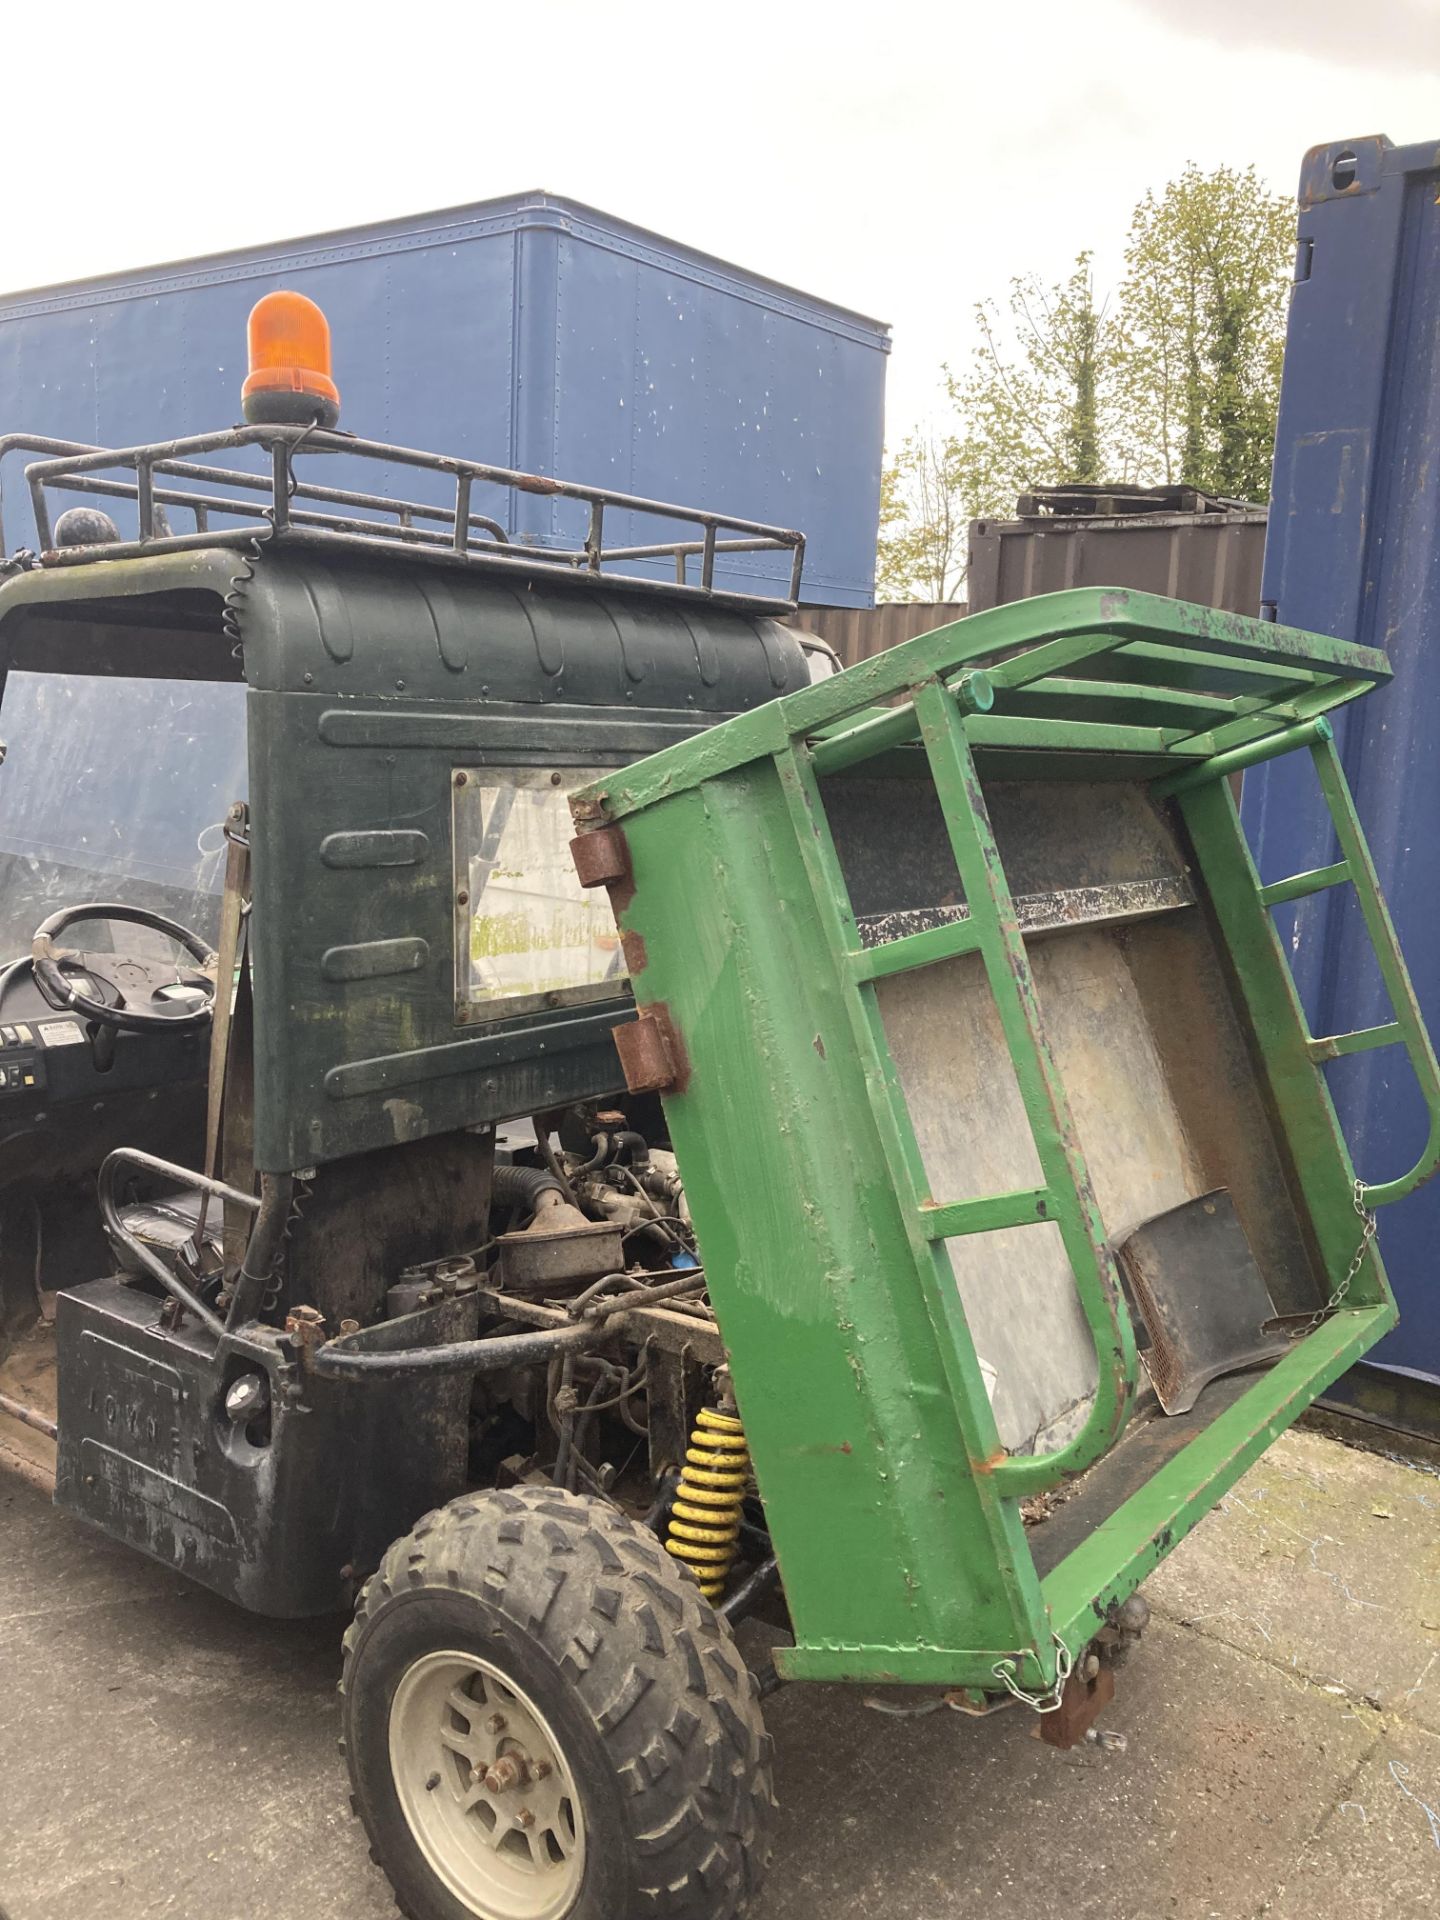 JOYNER JNSZ65OUV 4WD off road vehicle - petrol - green - manual tipper body - complete with manual. - Image 9 of 15